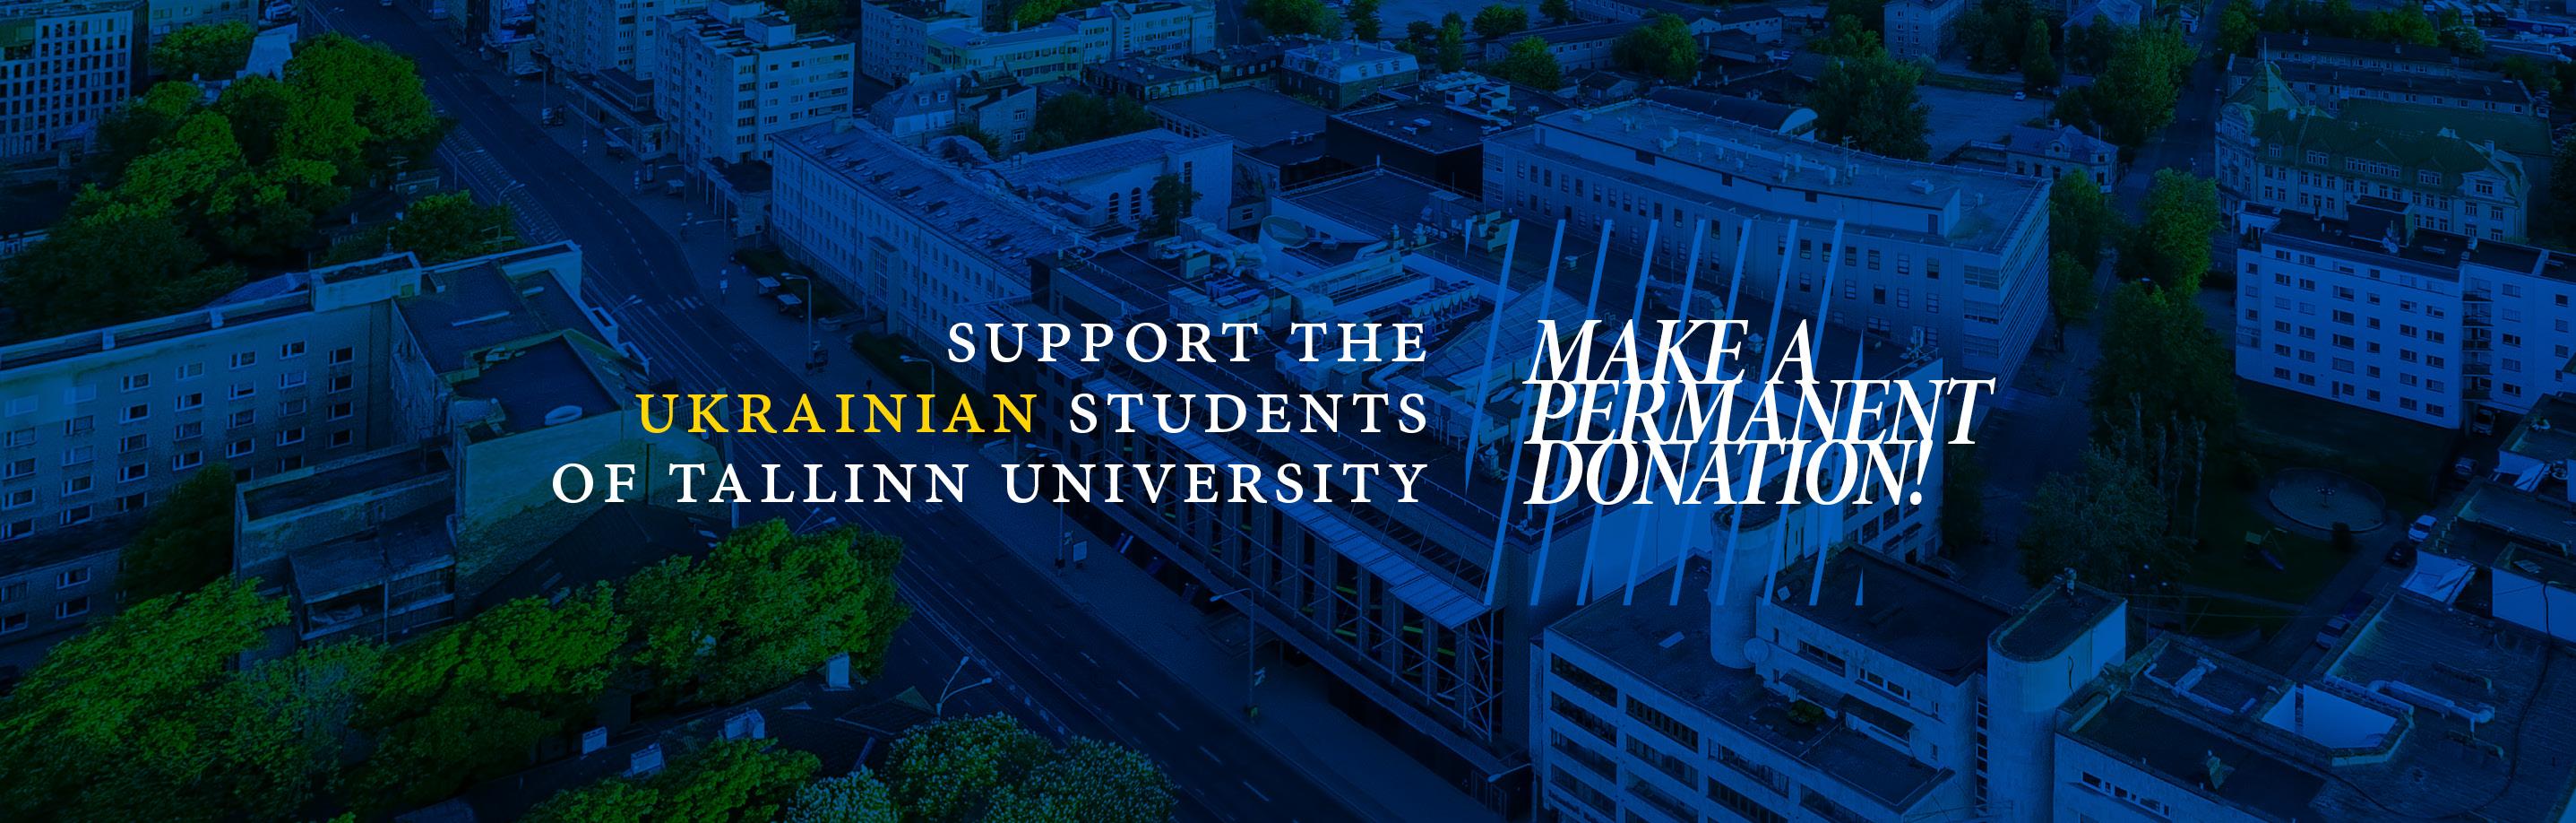 Visual:  Support the Ukrainian students of TLU – become a permanent donor!